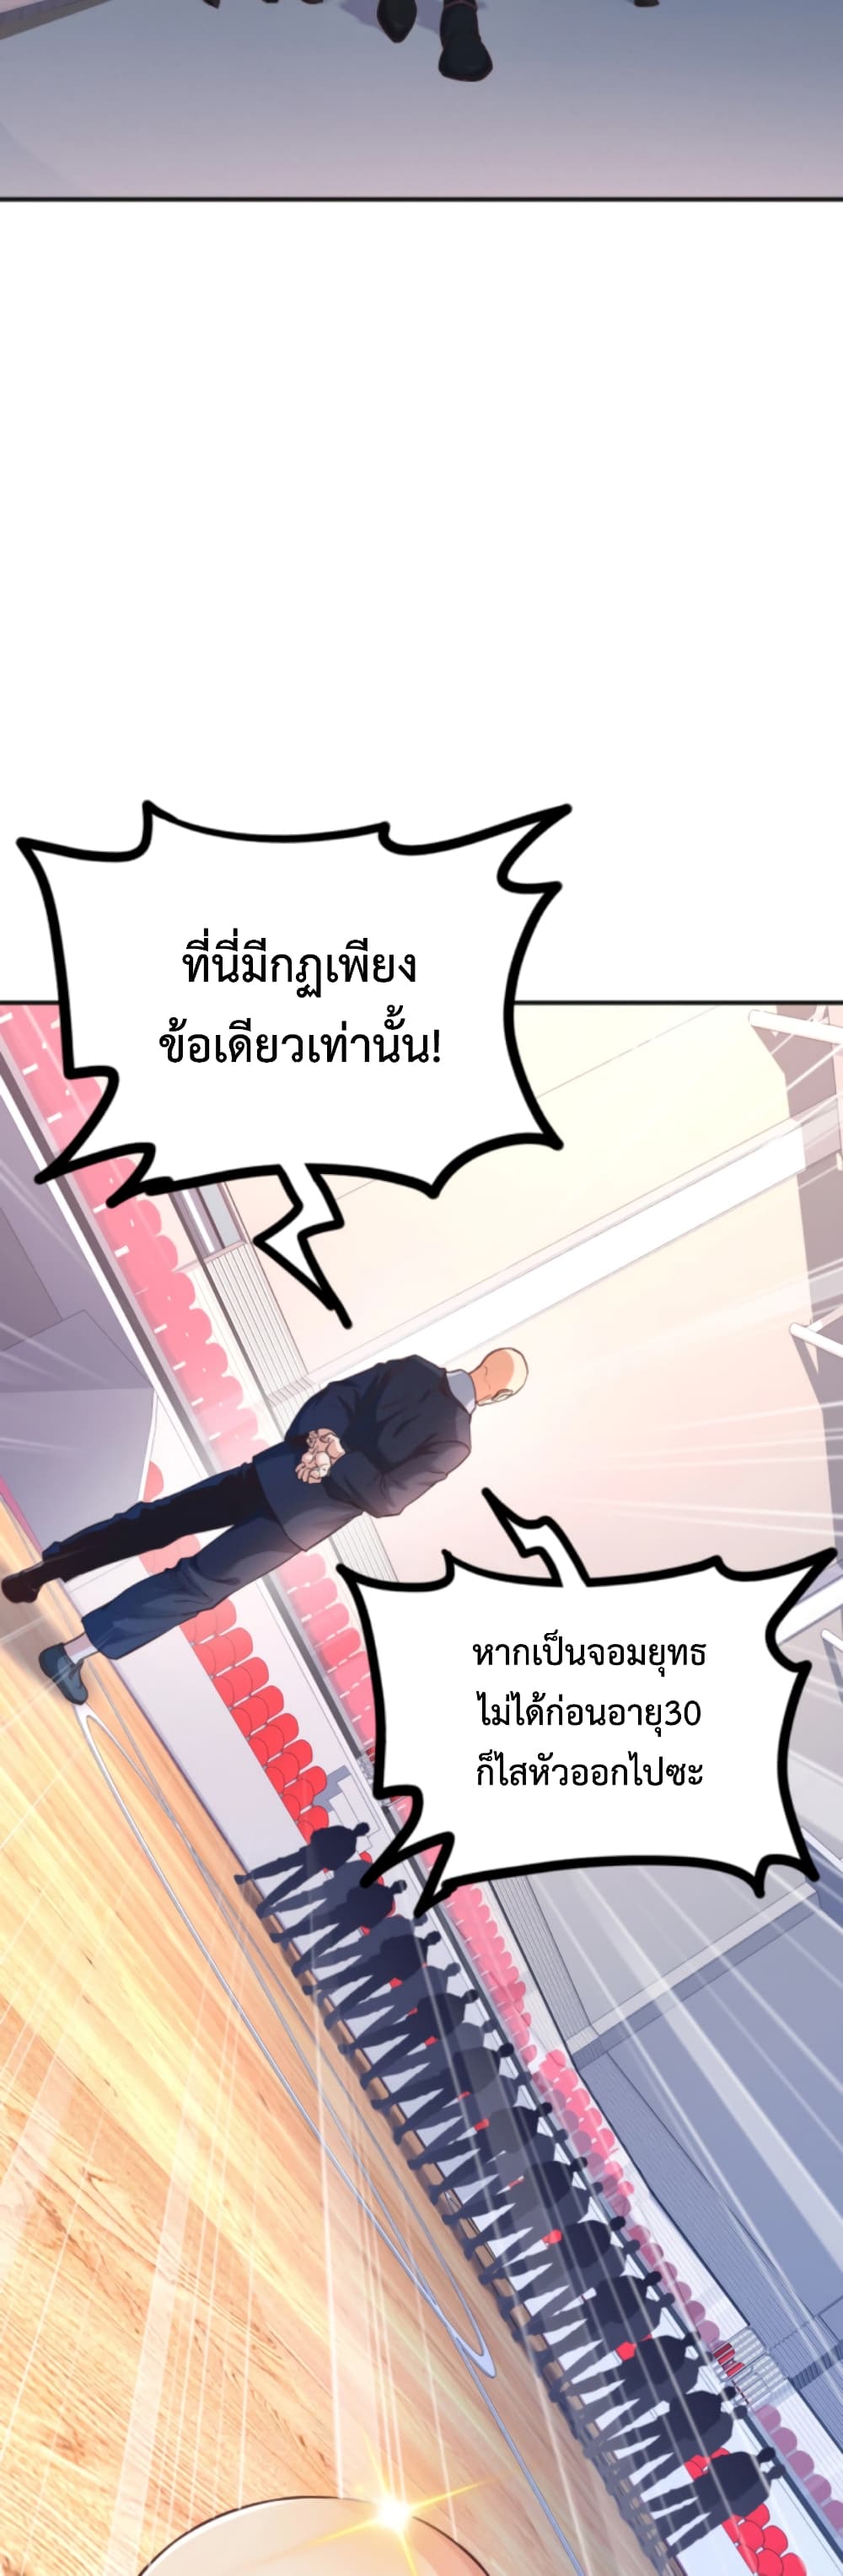 Level Up in Mirror ตอนที่ 10 (11)